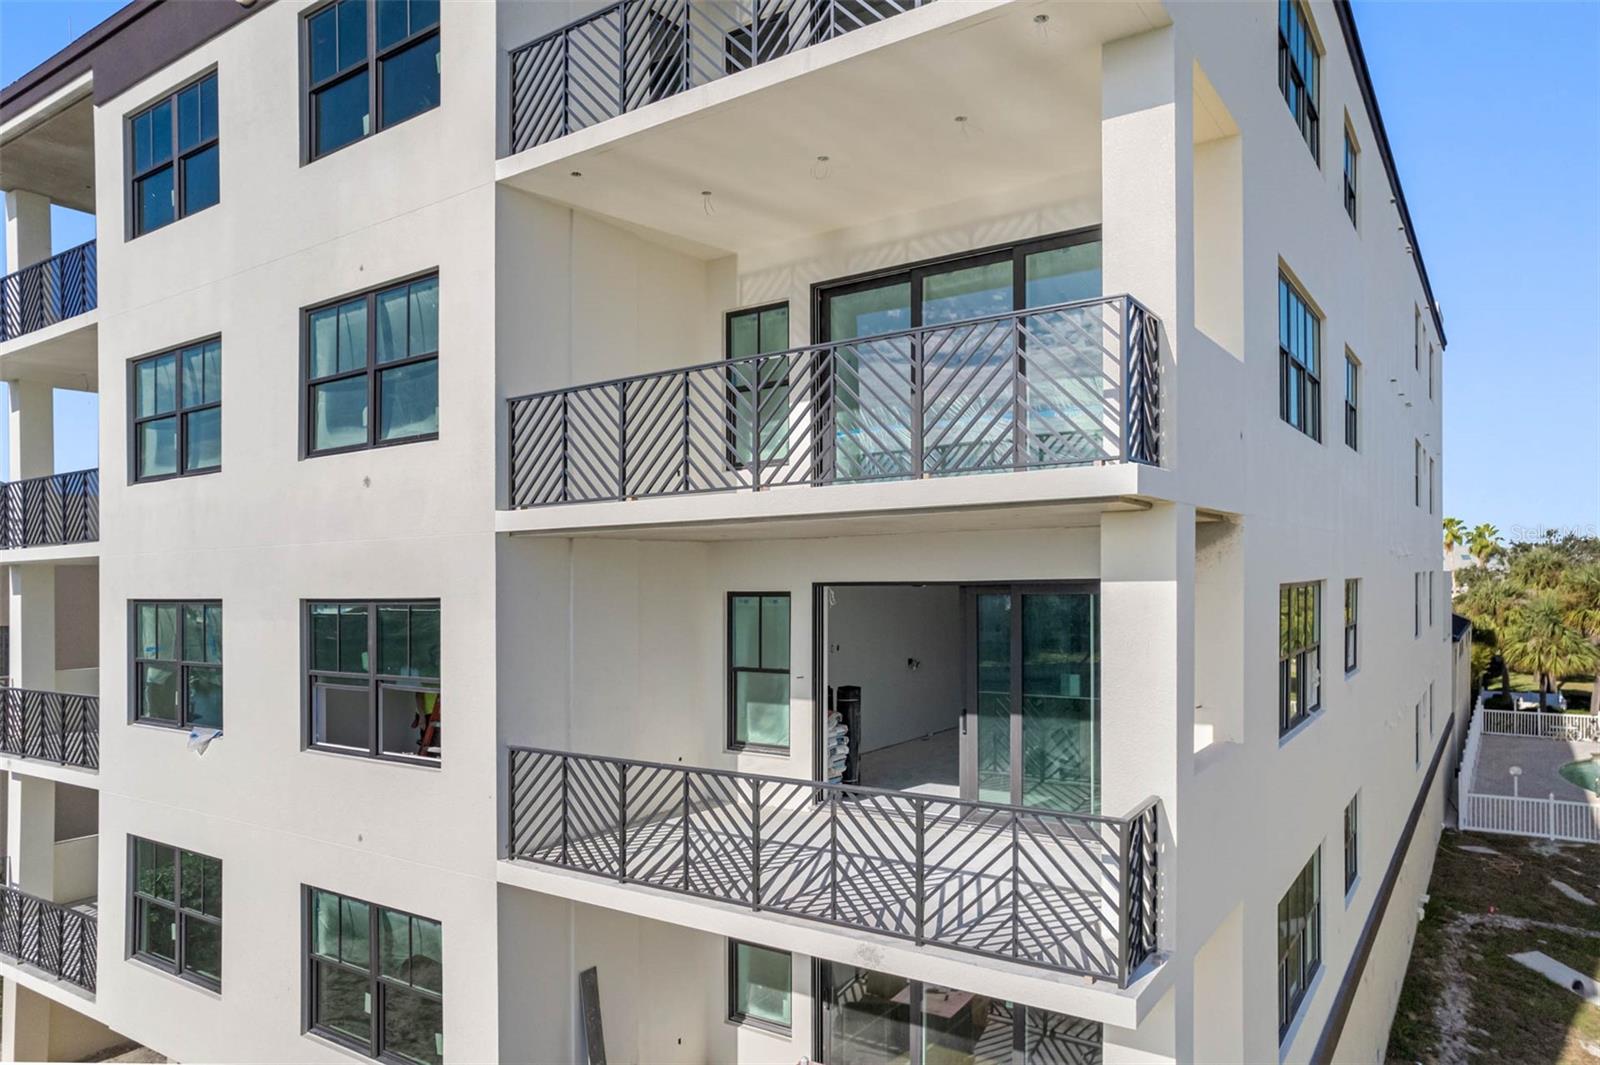 Each residence is considered a corner unit with sunlight pouring throughout the condo.